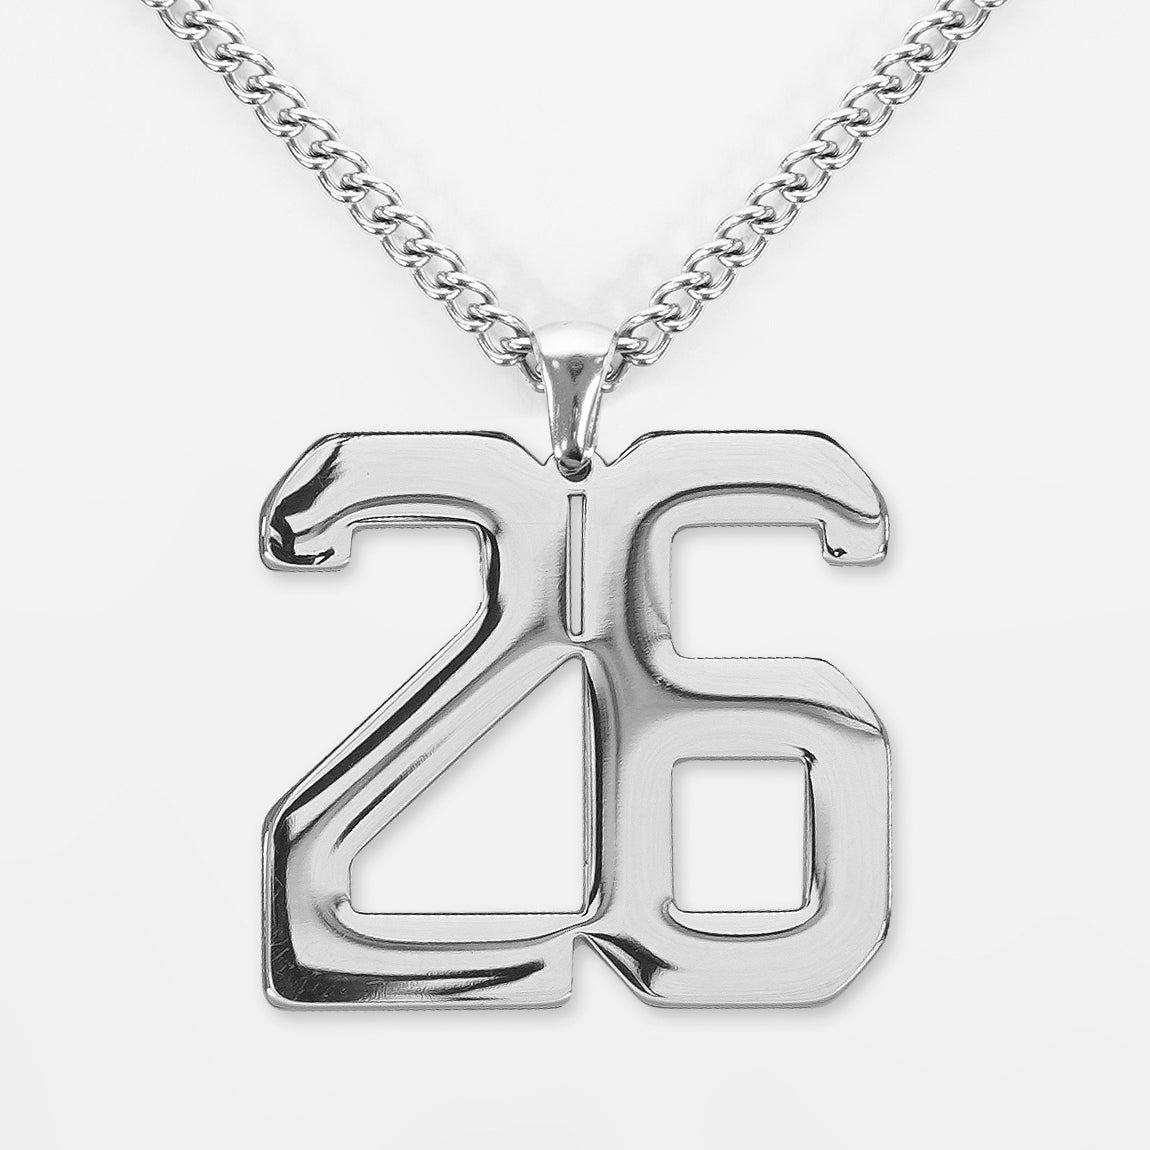 26 Number Pendant with Chain Necklace - Stainless Steel